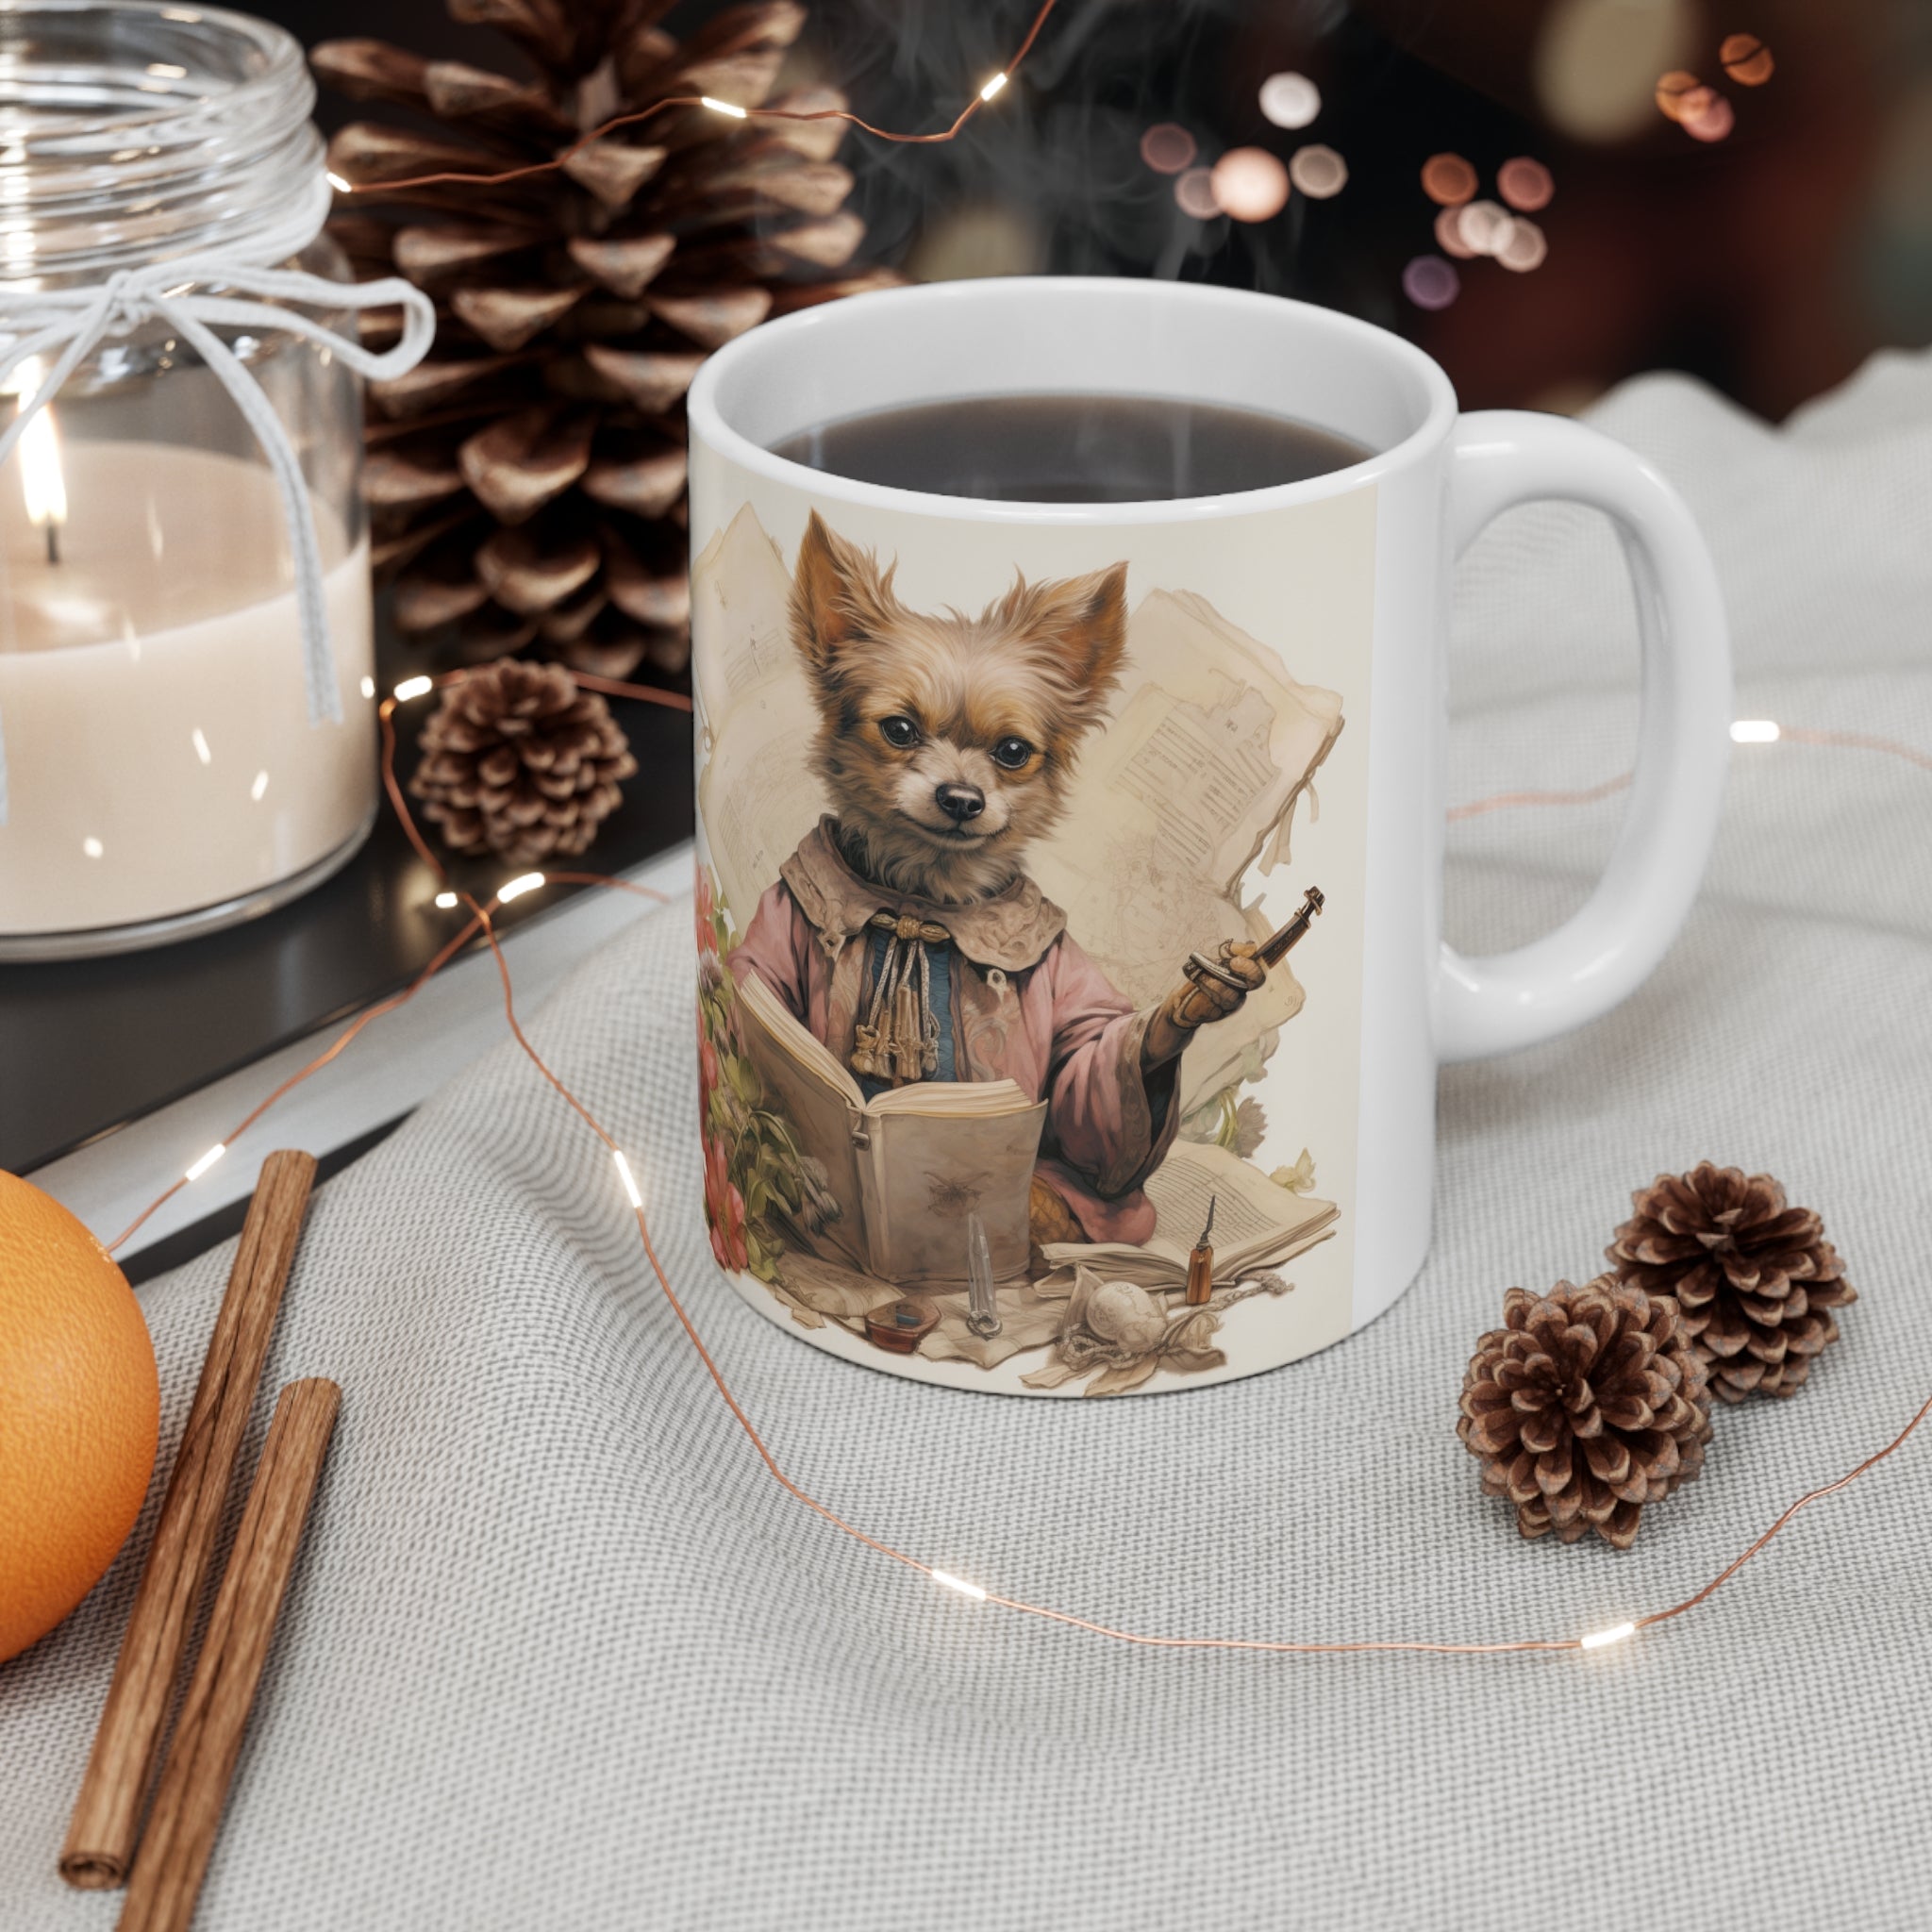 Mother's Day Awesome Gift: Relaxing Garden Pet 11oz Ceramic Mug | Exclusive Garden Puppy Design | Relaxing Durable & Aesthetic Drinkware